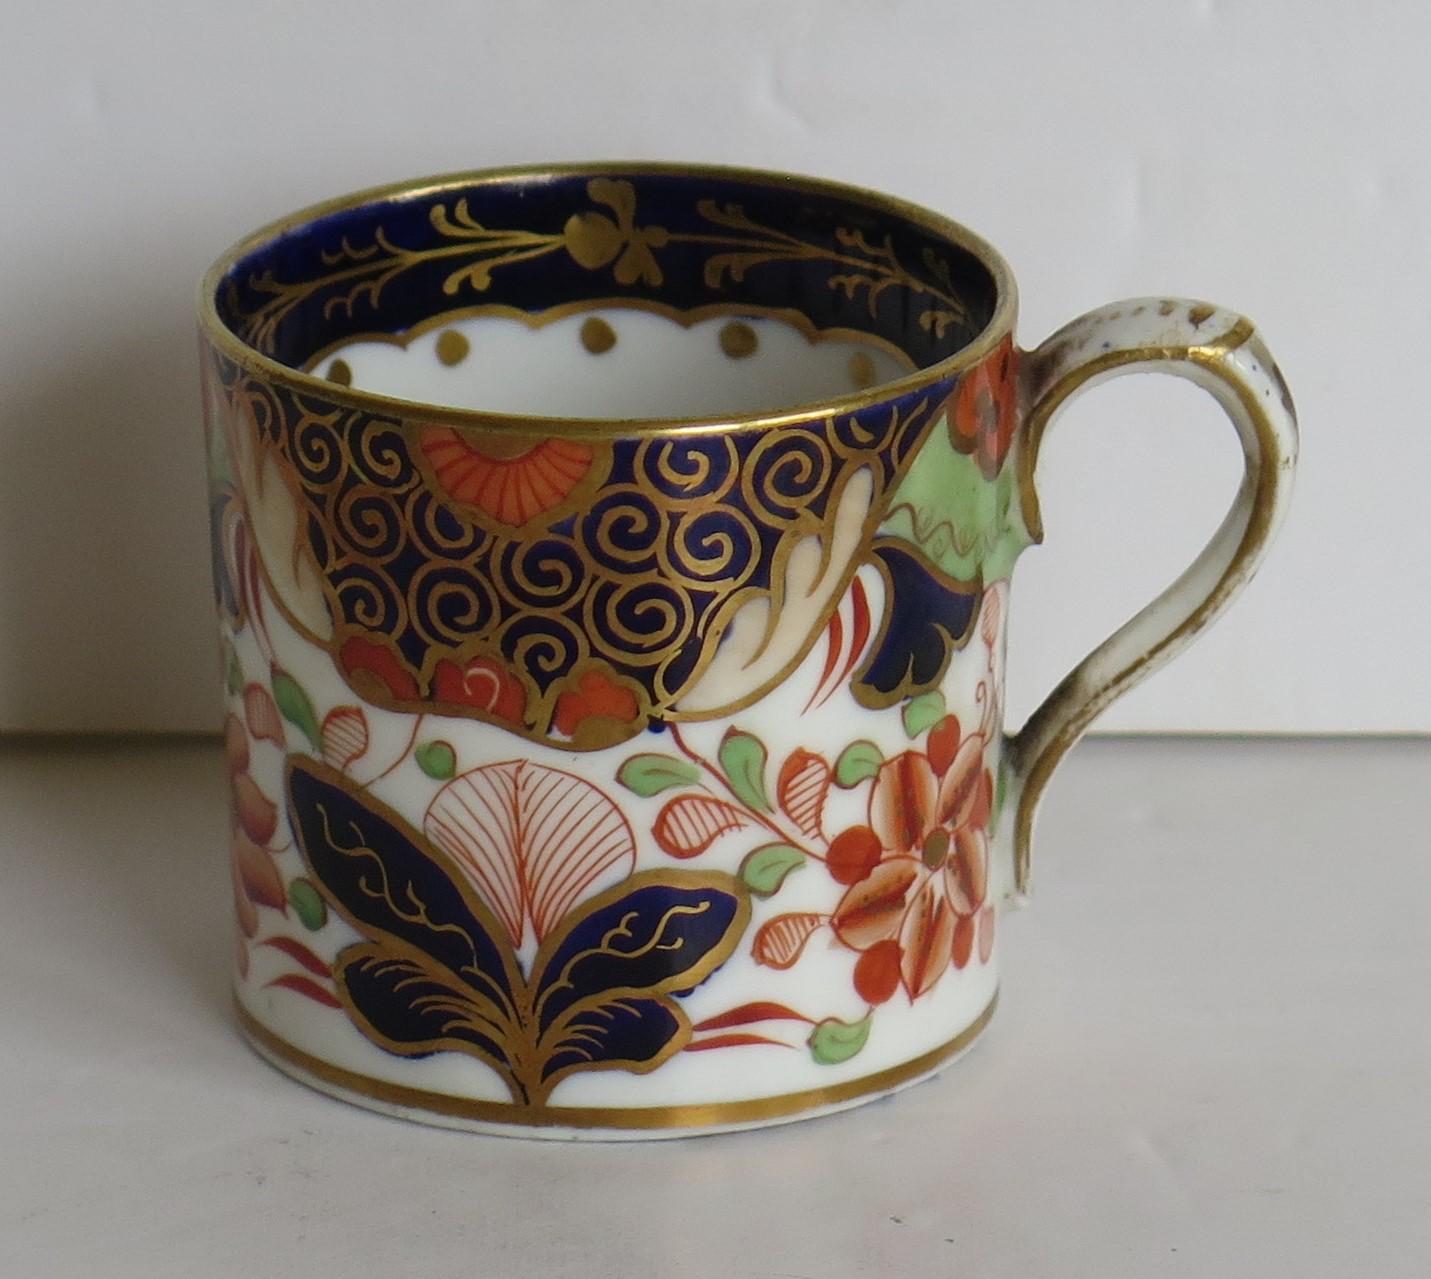 This is a very good quality Small Coffee Can ( Cup ) that we attribute to the Davenport pottery, Longport, Staffordshire Potteries, England, made during the John Rose period of the George 111rd years, circa 1805-1810.

The coffee can is of small